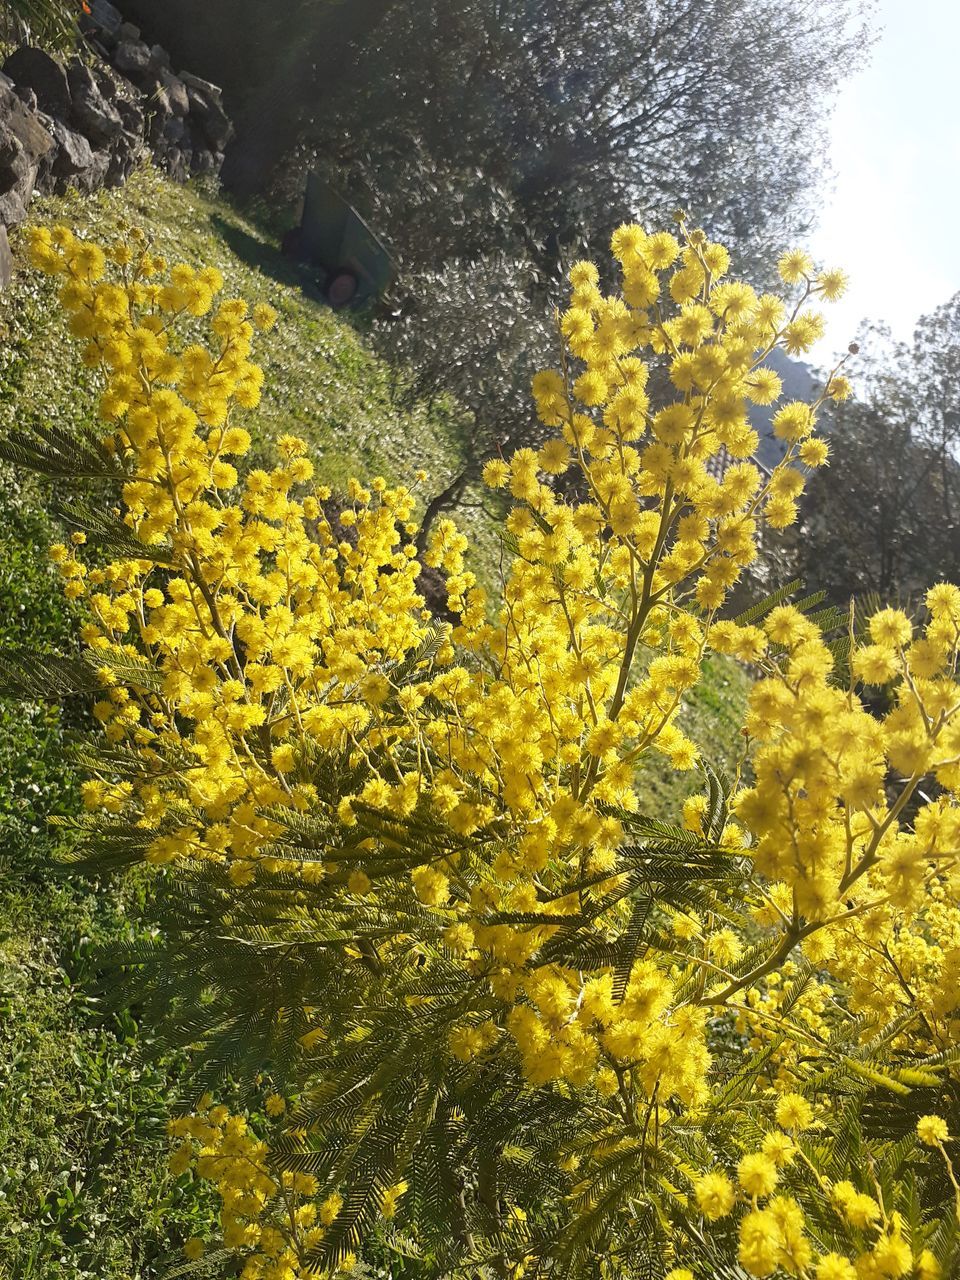 plant, yellow, growth, beauty in nature, tree, produce, nature, flower, flowering plant, freshness, day, no people, sunlight, rapeseed, tranquility, shrub, food, outdoors, branch, land, springtime, green, scenics - nature, blossom, fragility, leaf